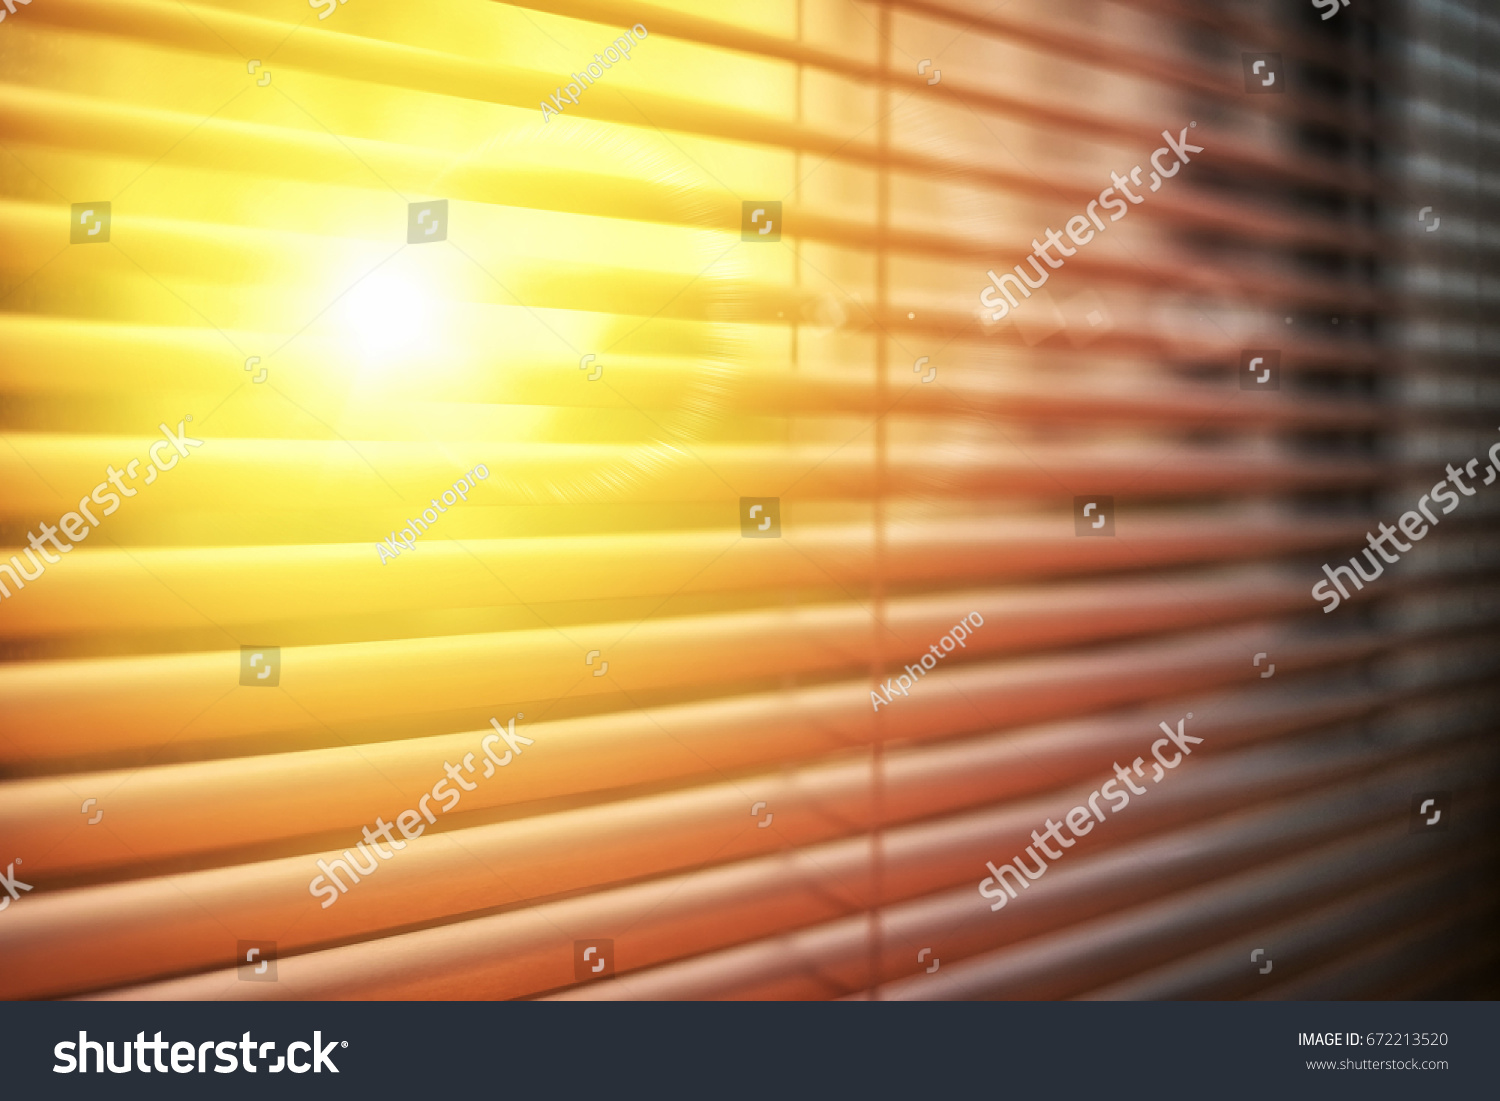 Sun Rise Behind Window Blinds Curtains Stock Photo Edit Now 672213520